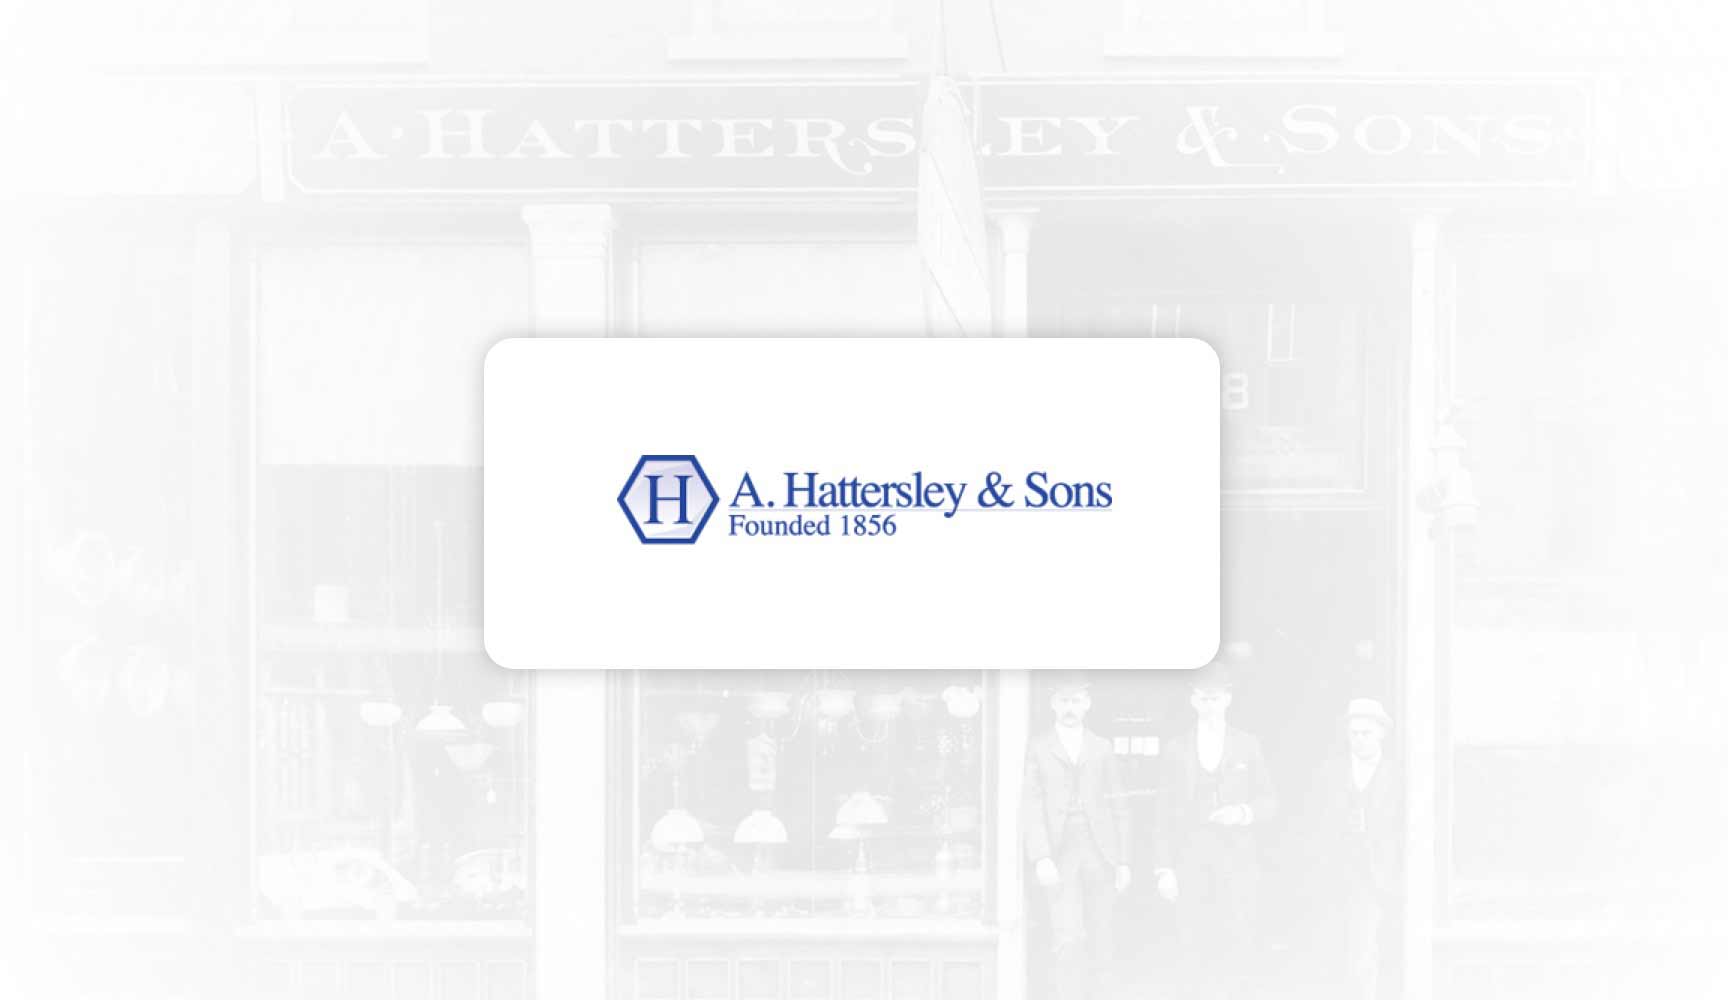 A. Hattersly & Sons Old Logo